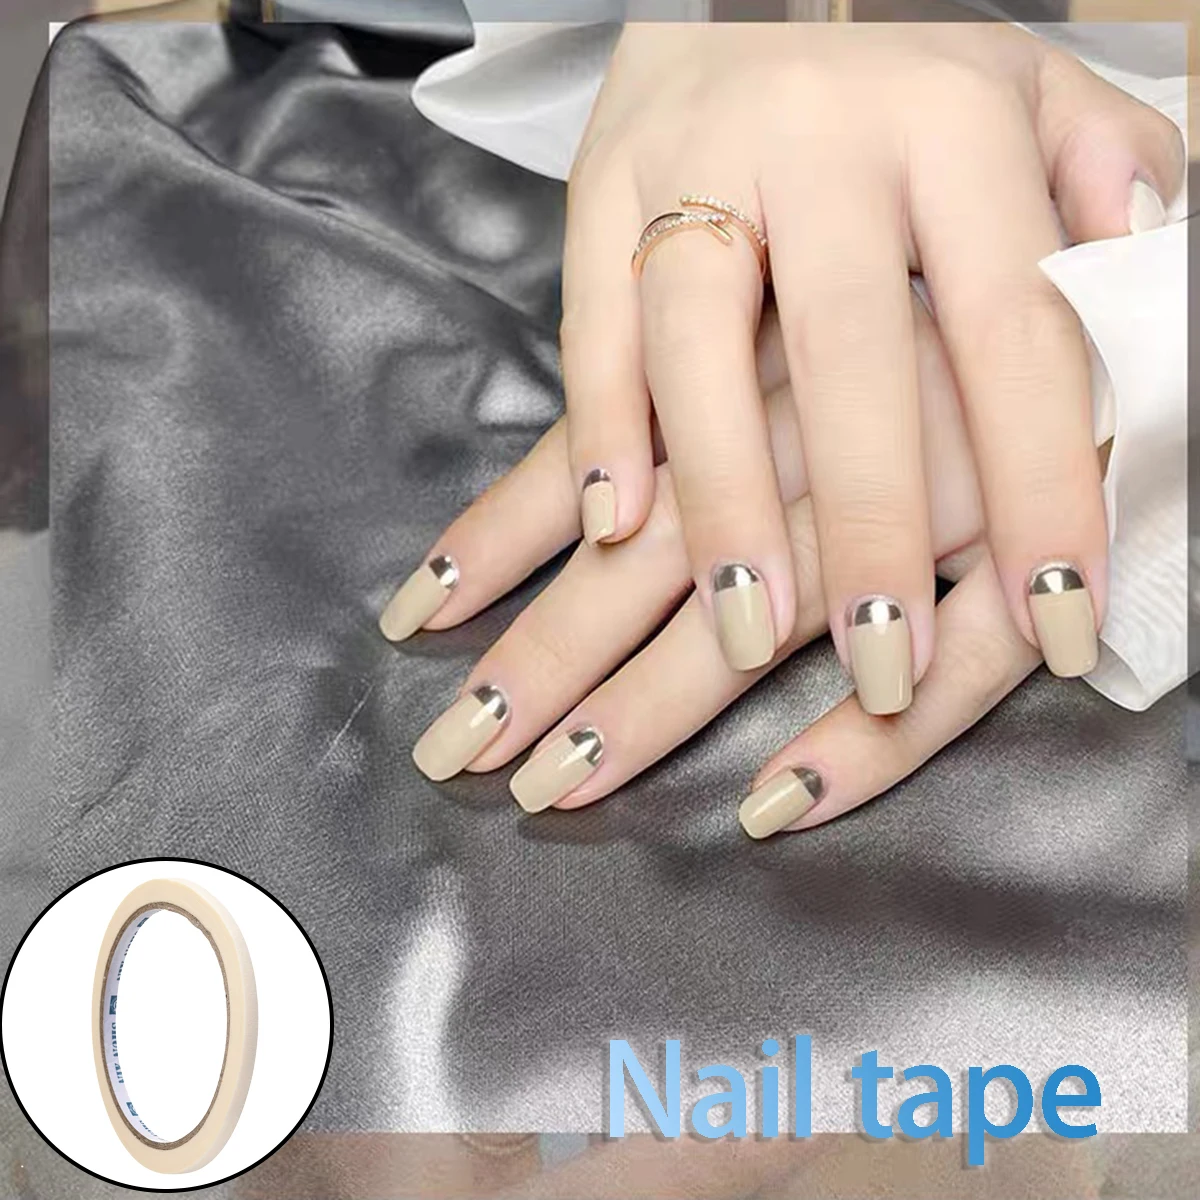 

White 0.5cm*17m Nail Art Tape Sticker Rolls Nails Decoration Edge Guide Tips DIY Stickers Manicure Stripe Tools